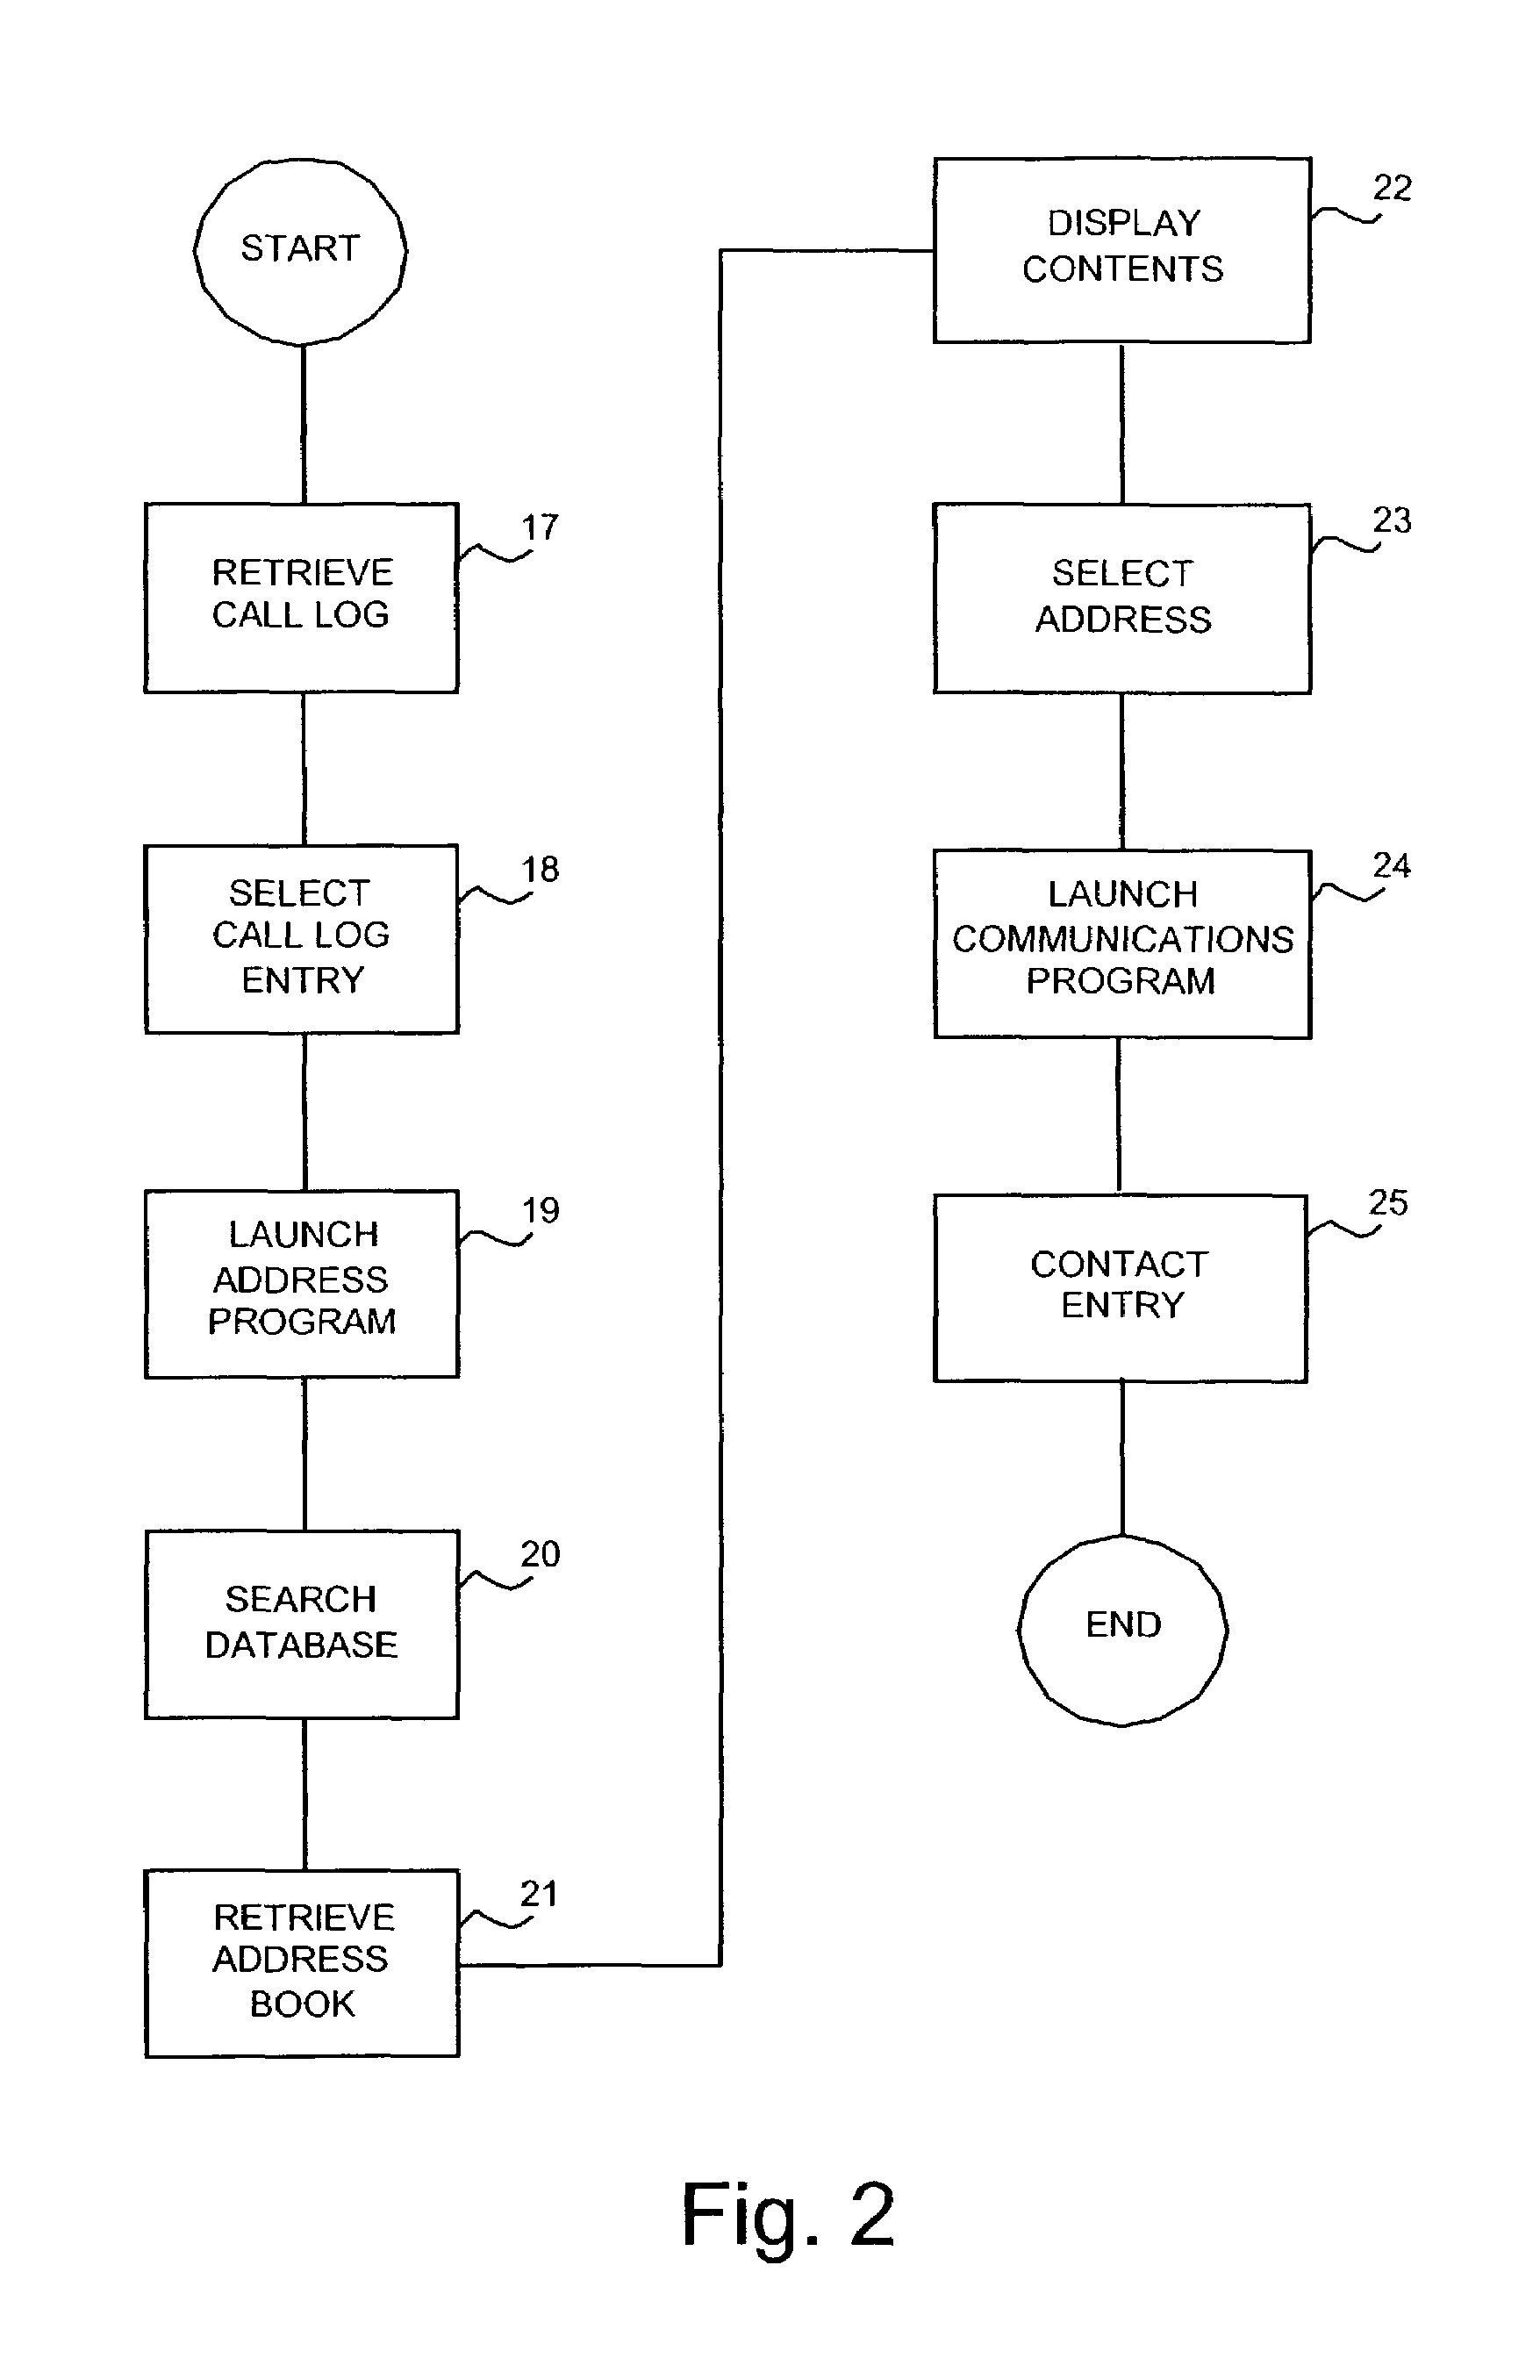 Method for linking call log information to address book entries and replying using medium of choice